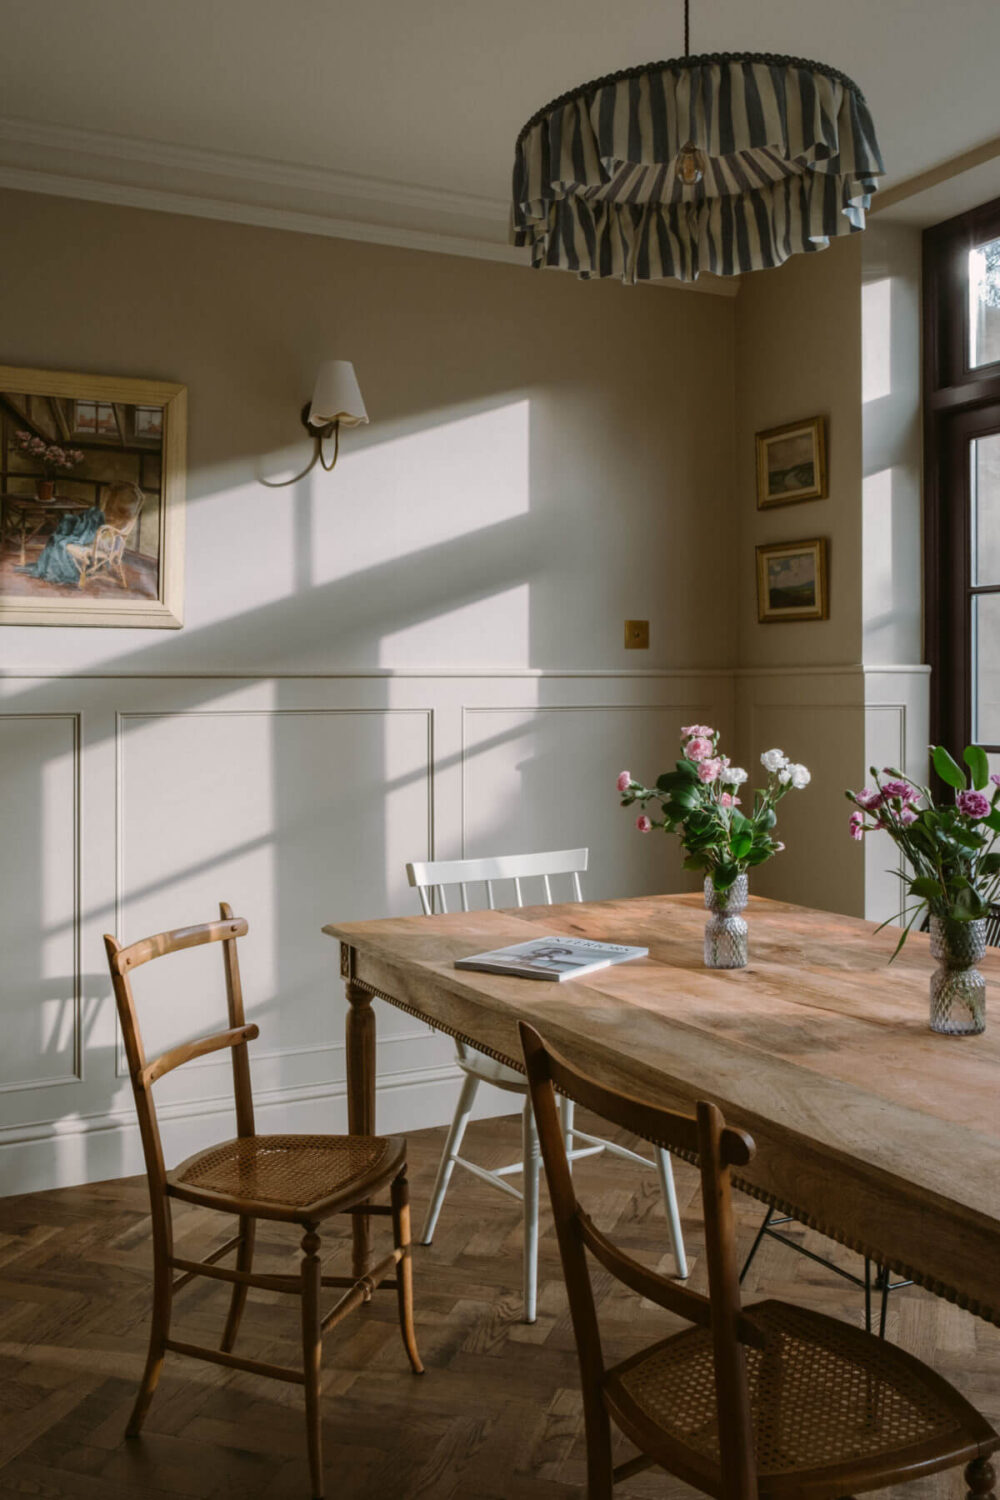 rustic-wooden-dining-table-vintage-chairs-country-style-kitchen-devol-nordroom